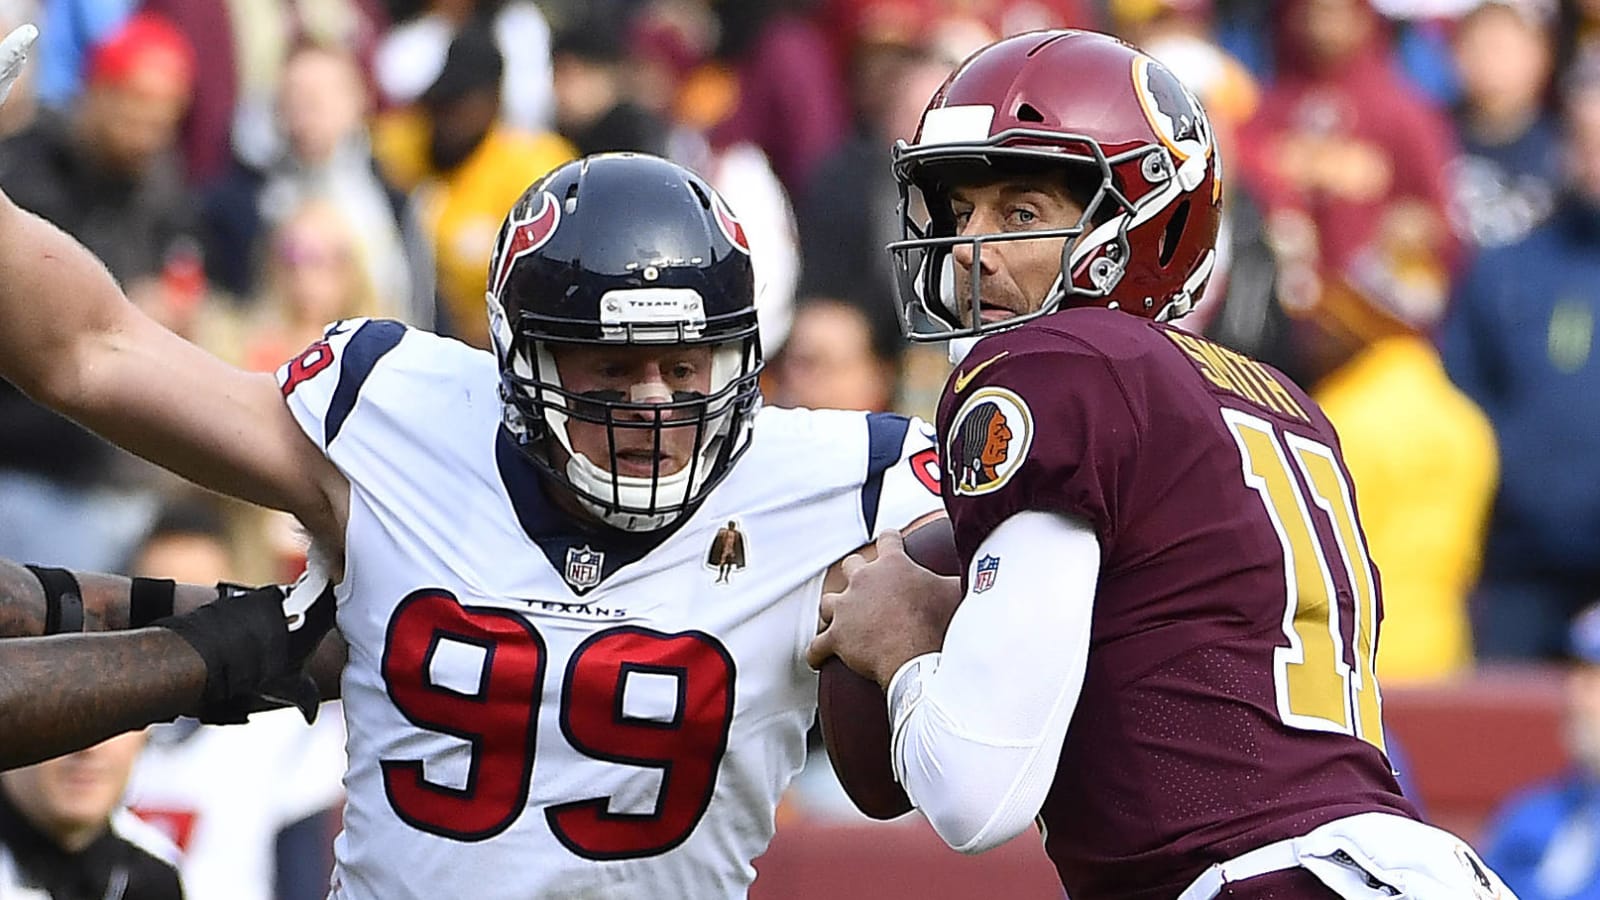 Texans' J.J. Watt tweets support for Alex Smith's clearance to return